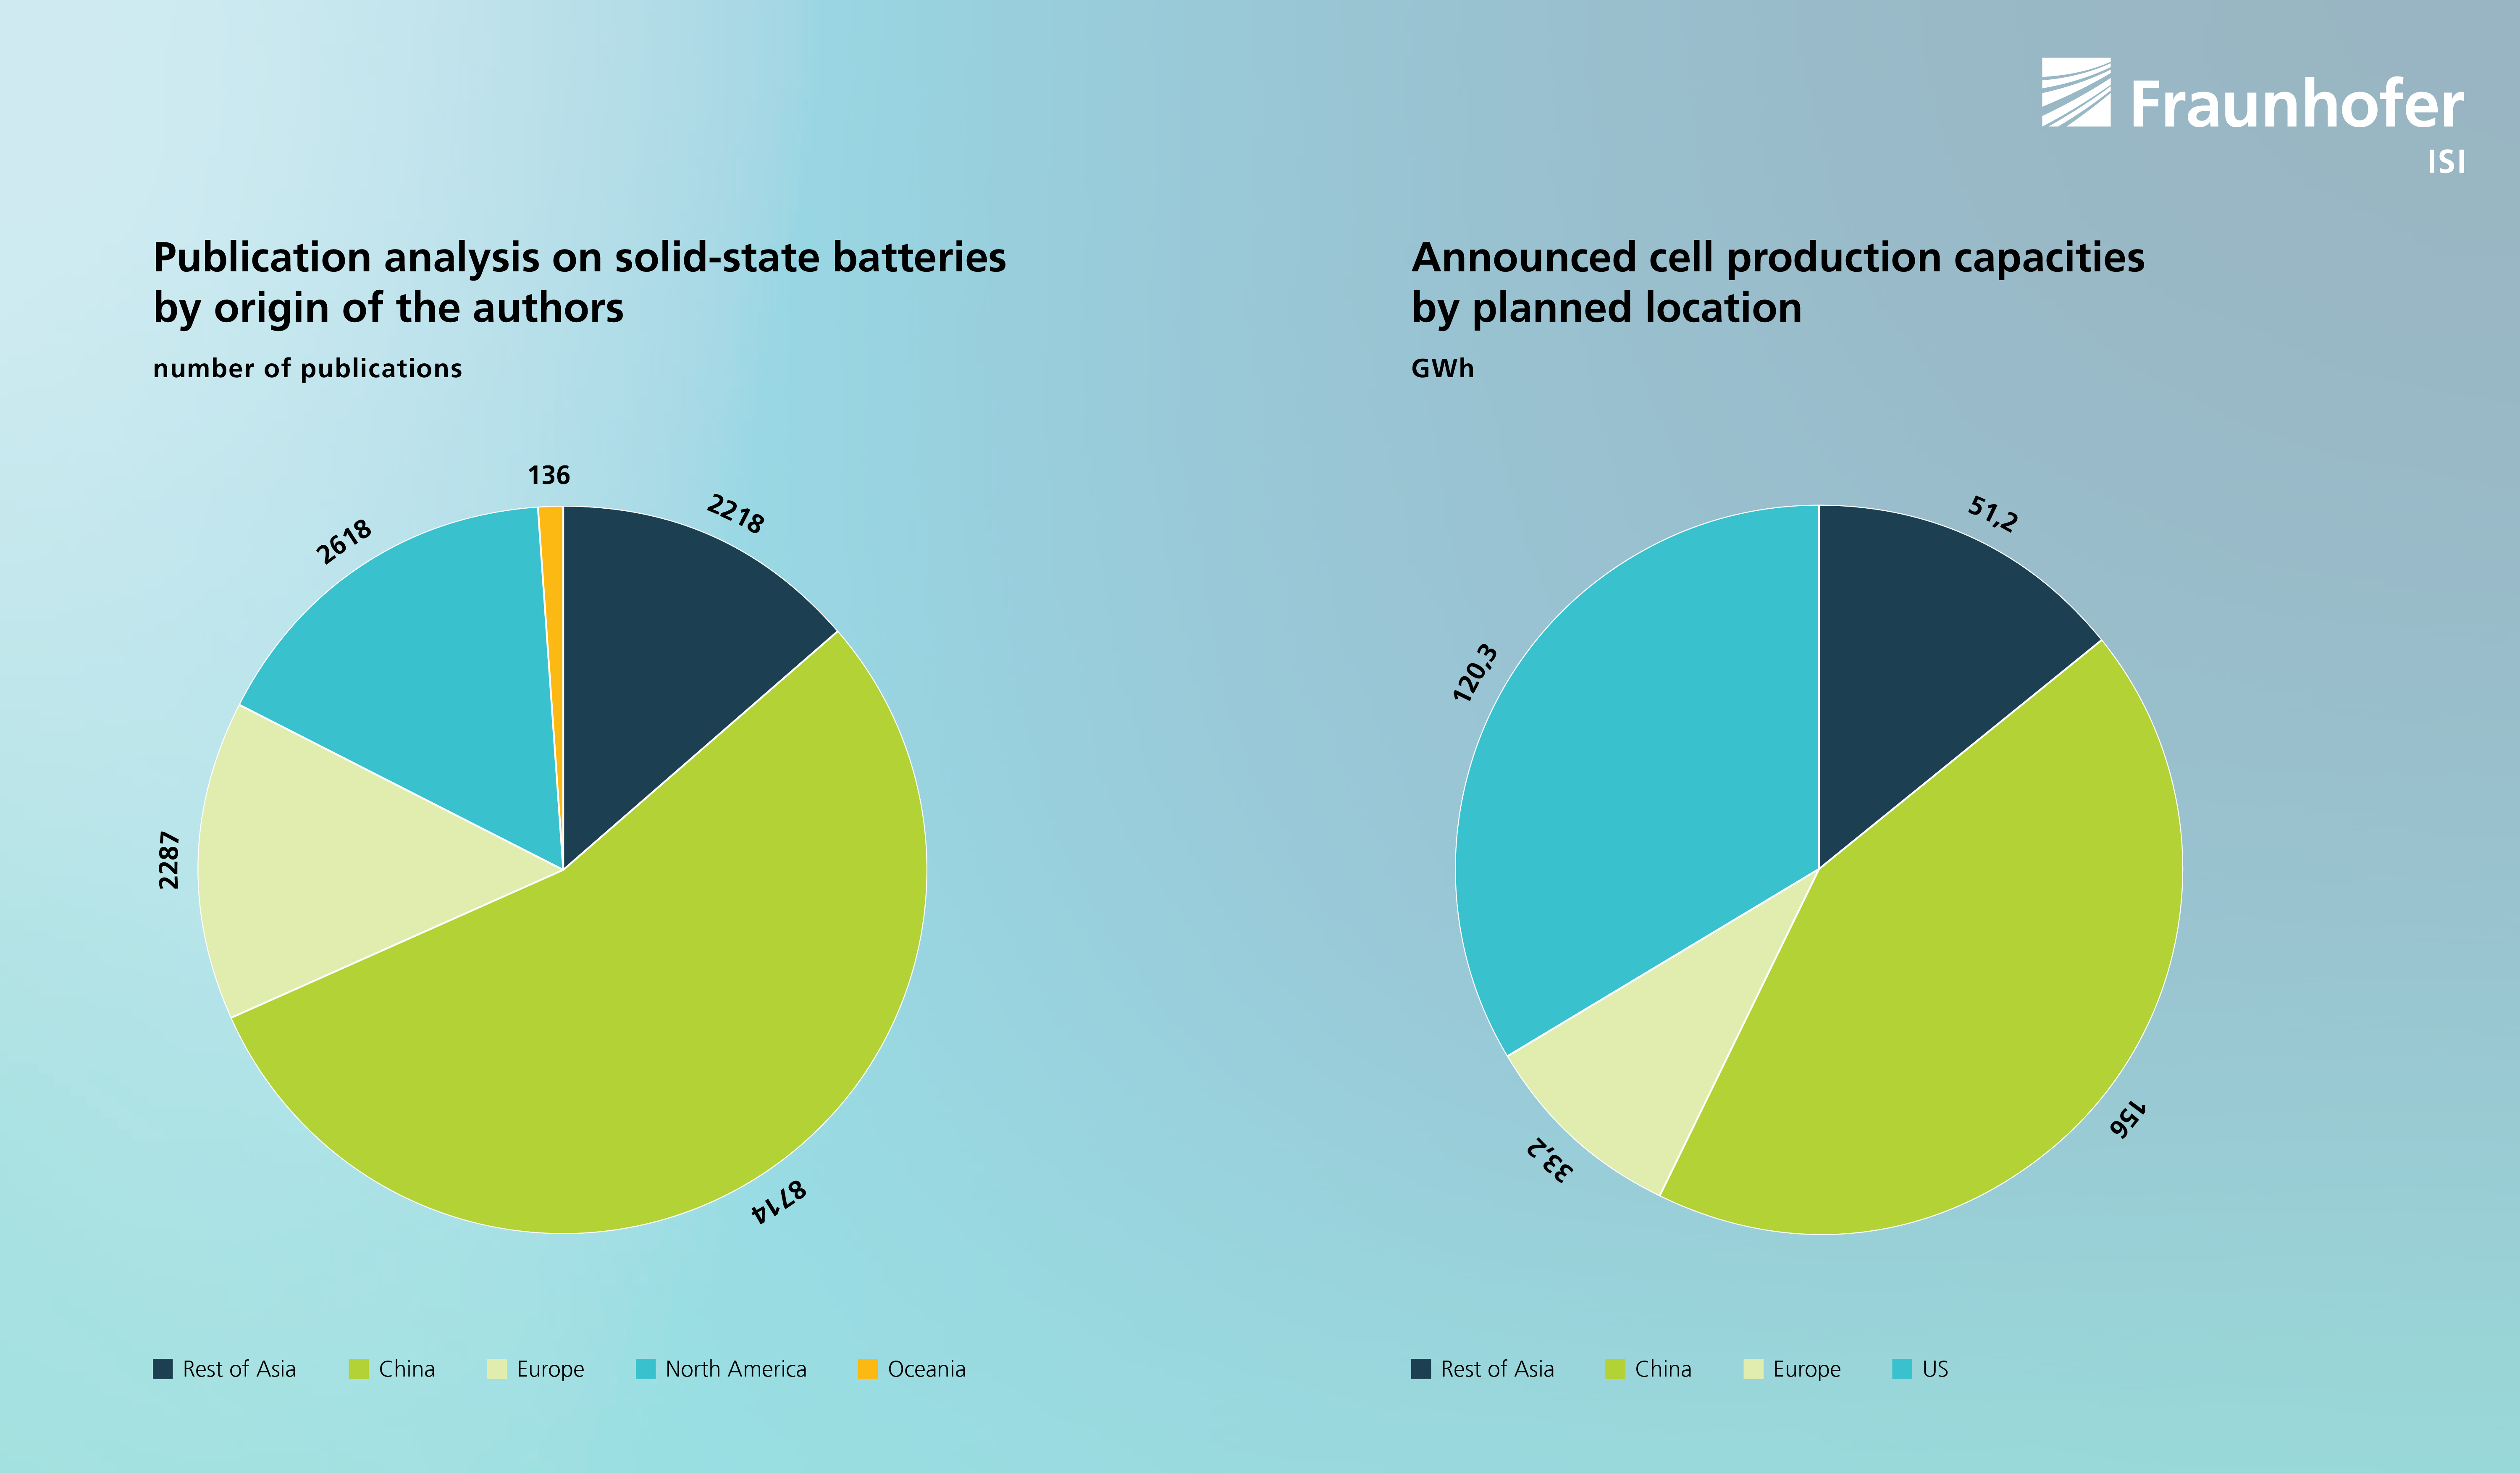 Solid-state batteries: Publications by origin and announced cell production capacities by planned location